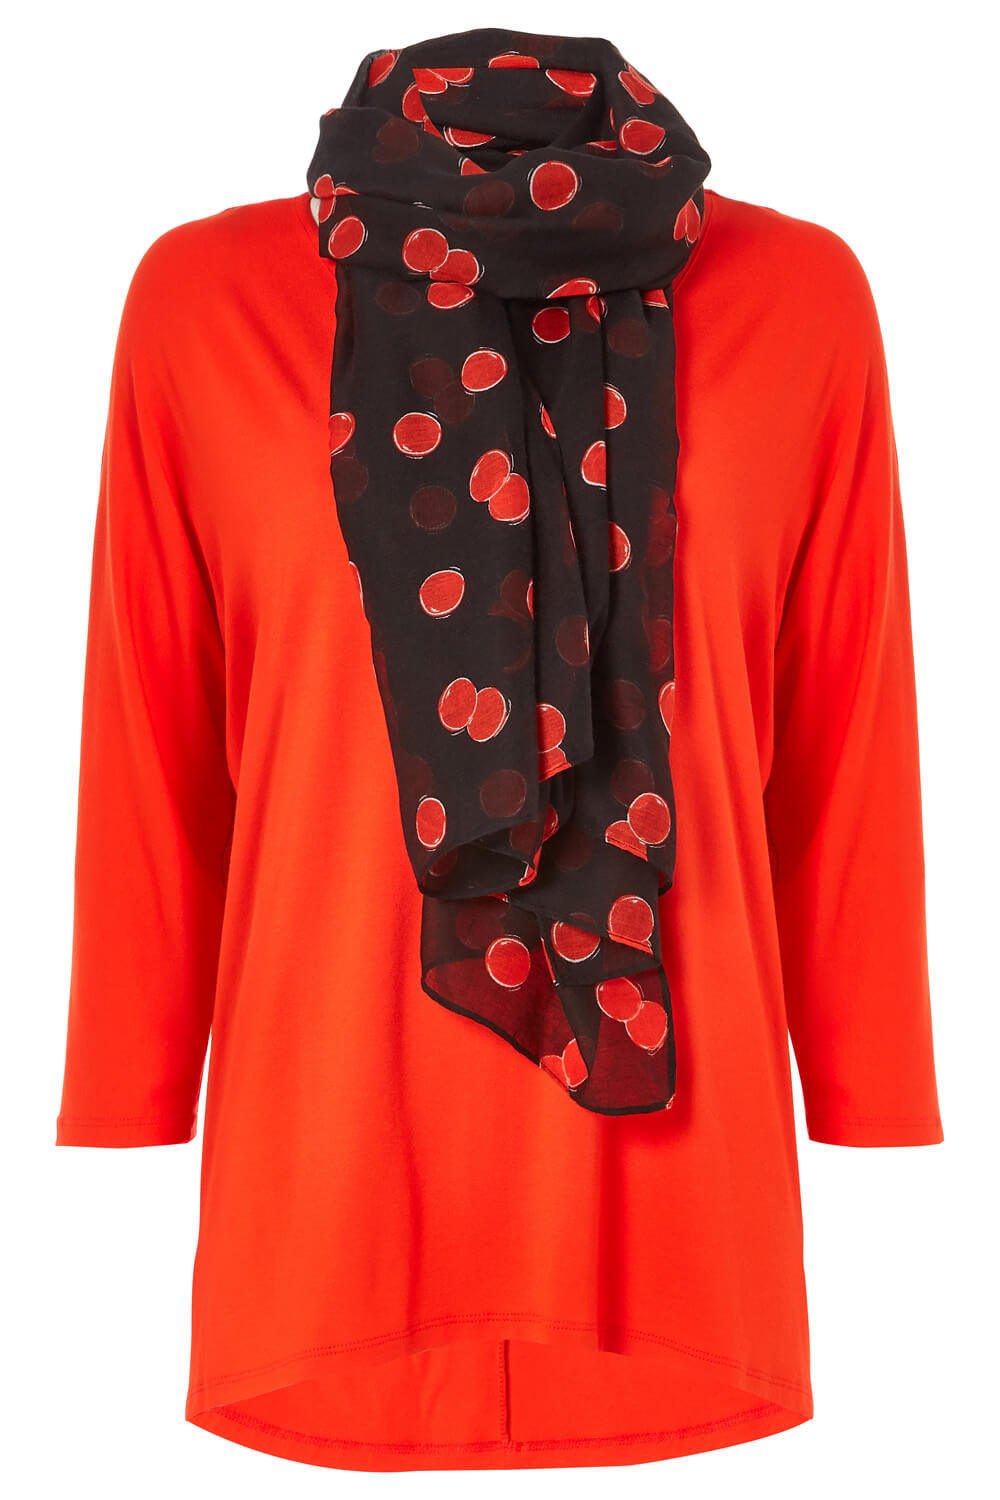 ORANGE Loose T-Shirt and Cherry Print Scarf, Image 5 of 5